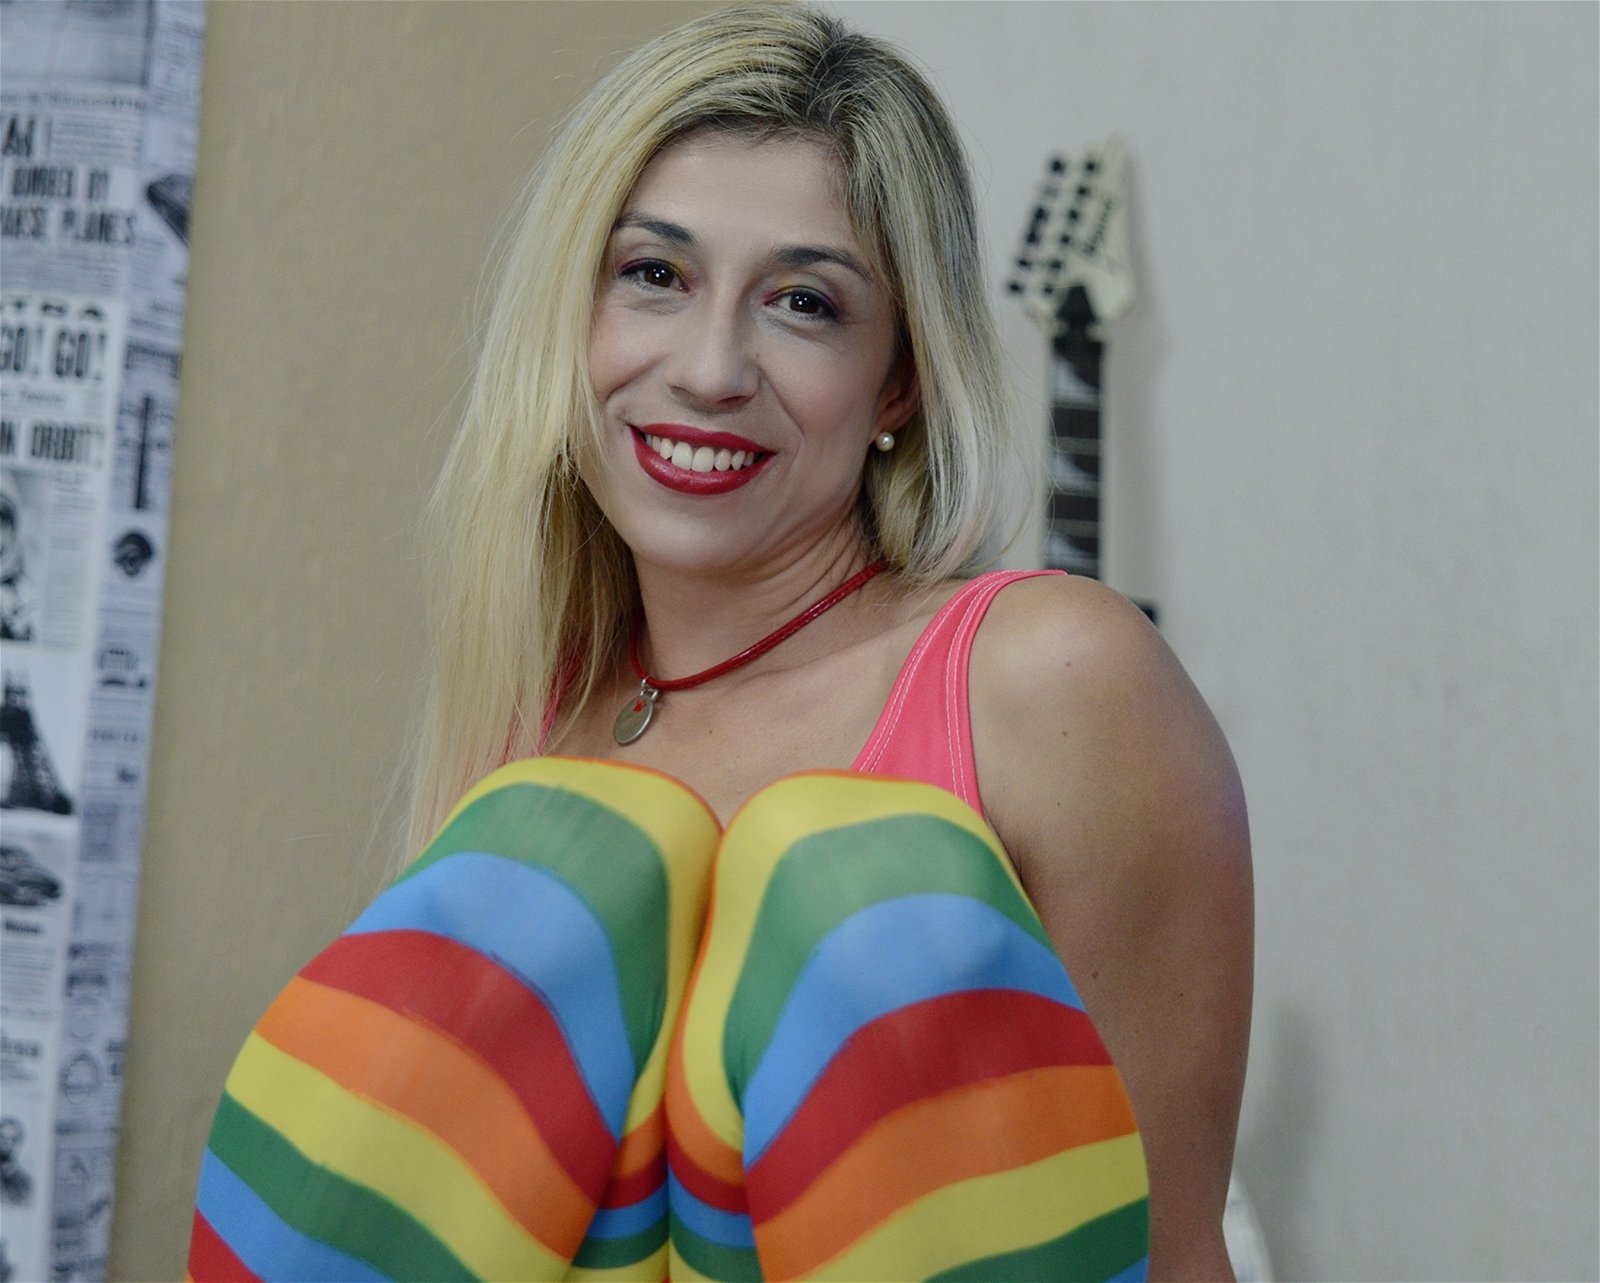 Photo by Lettywild with the username @LettyWild, who is a star user,  July 22, 2020 at 2:38 AM. The post is about the topic Amateurs and the text says 'I'm online on chaturbate and stripchat 🥰💋
Lettywild
Lettylatina
#rainbow #stockings'